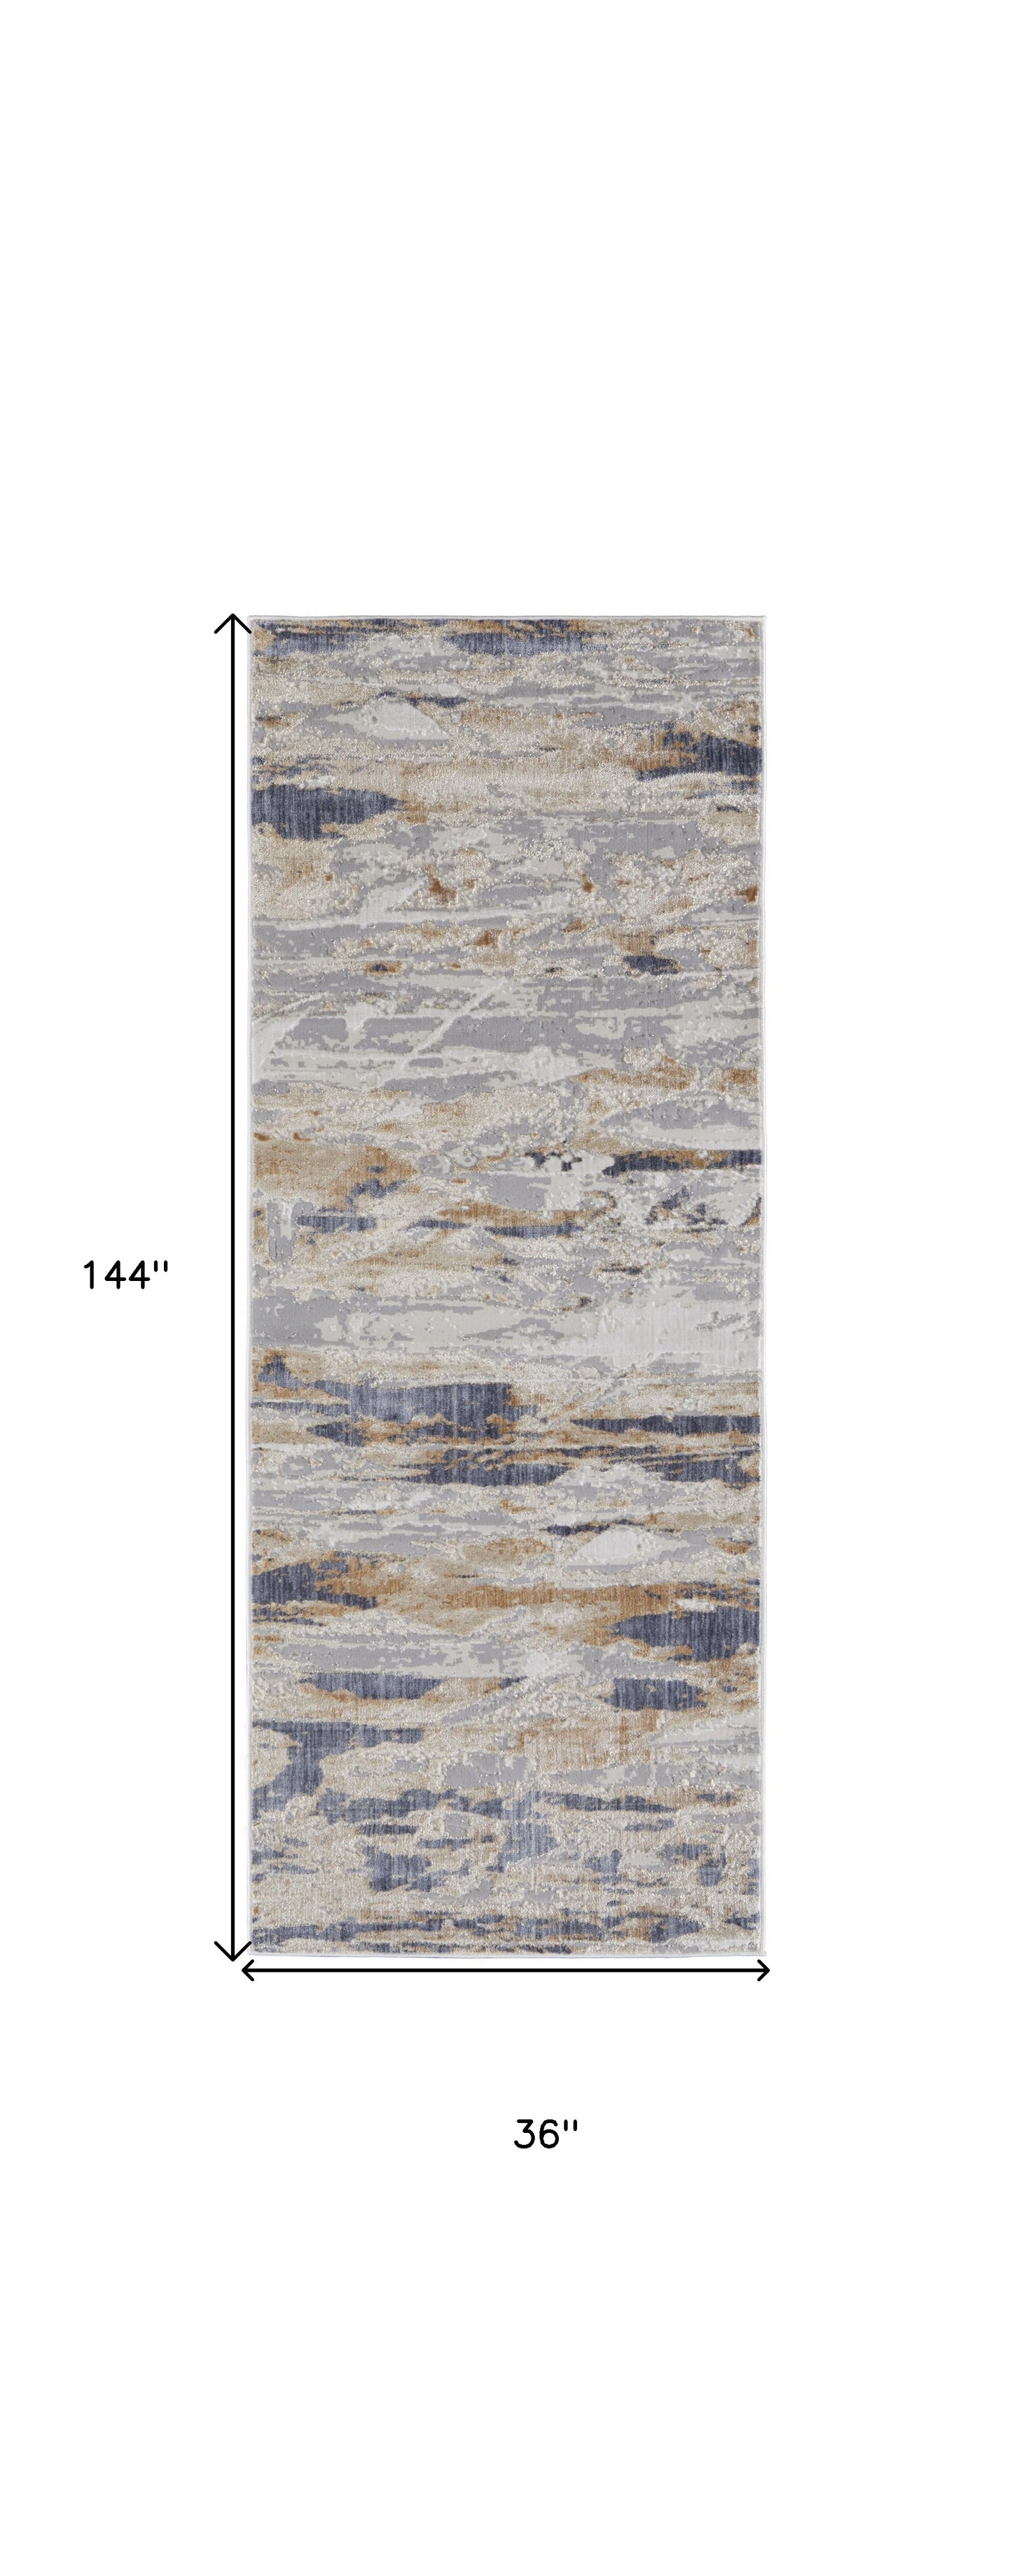 5' X 8' Tan Orange And Ivory Abstract Power Loom Distressed Area Rug